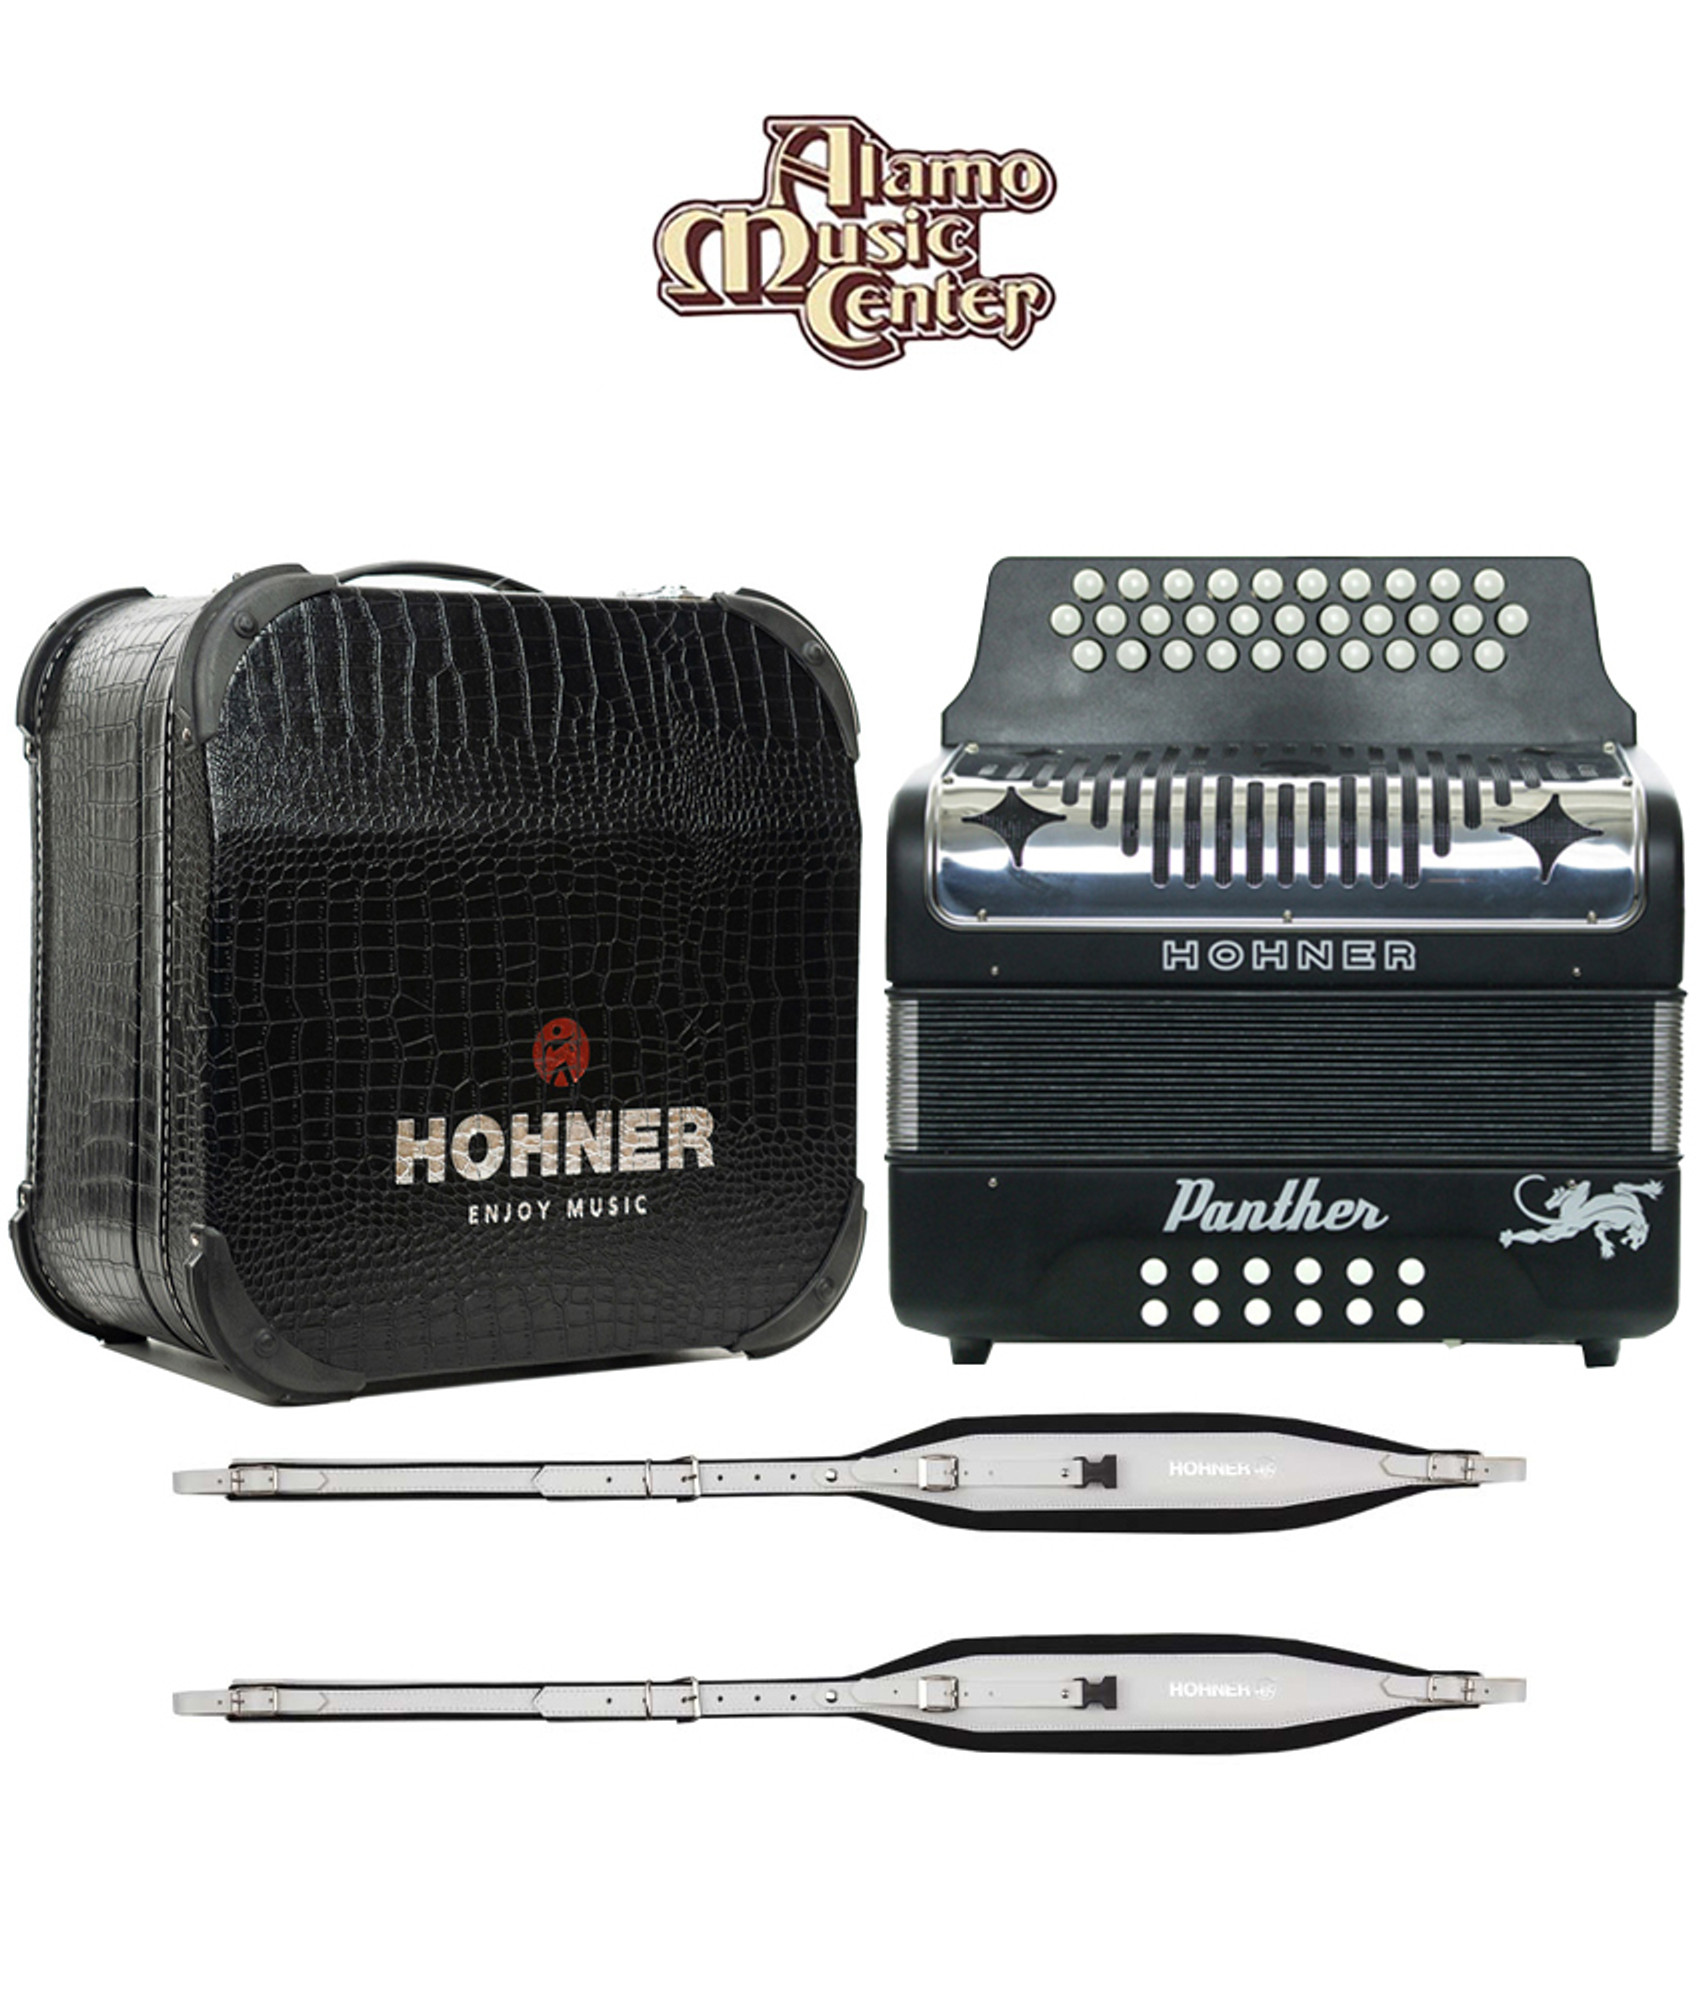 Hohner Panther GCF Accordion Bundle w/ Case and Back Strap